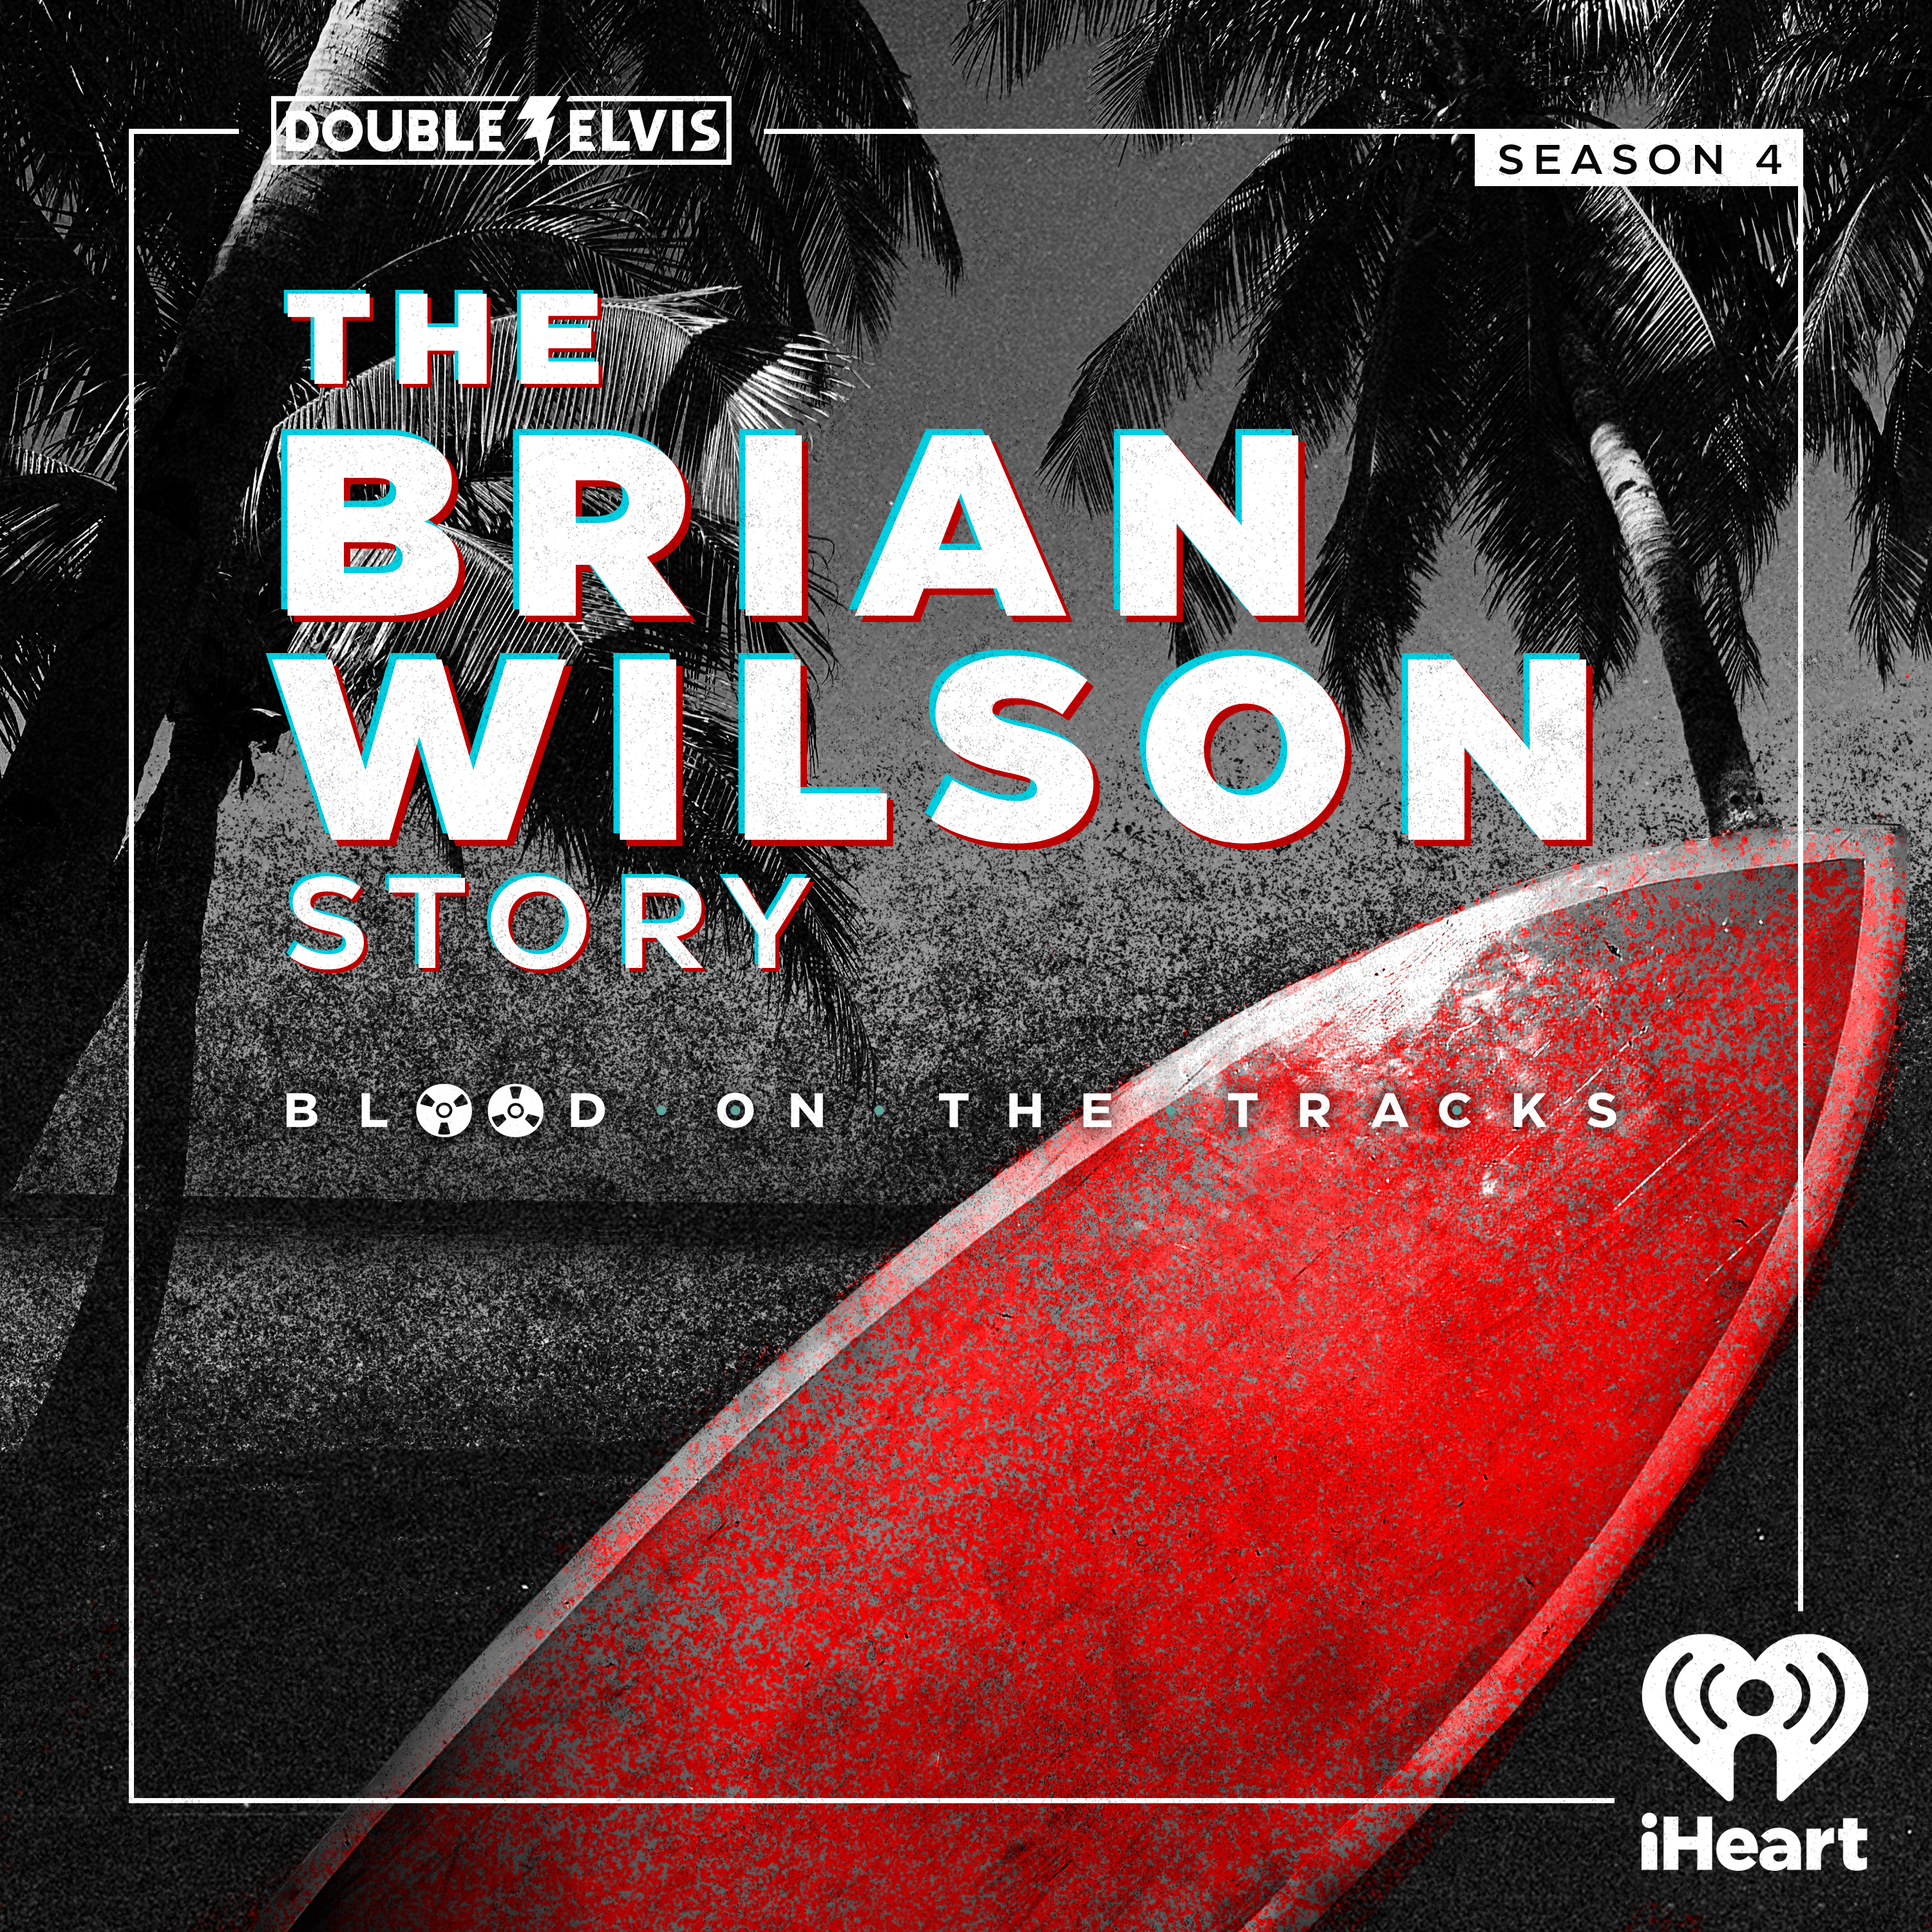 BLOOD ON THE TRACKS Season 4: The Brian Wilson Story:iHeartPodcasts and Double Elvis